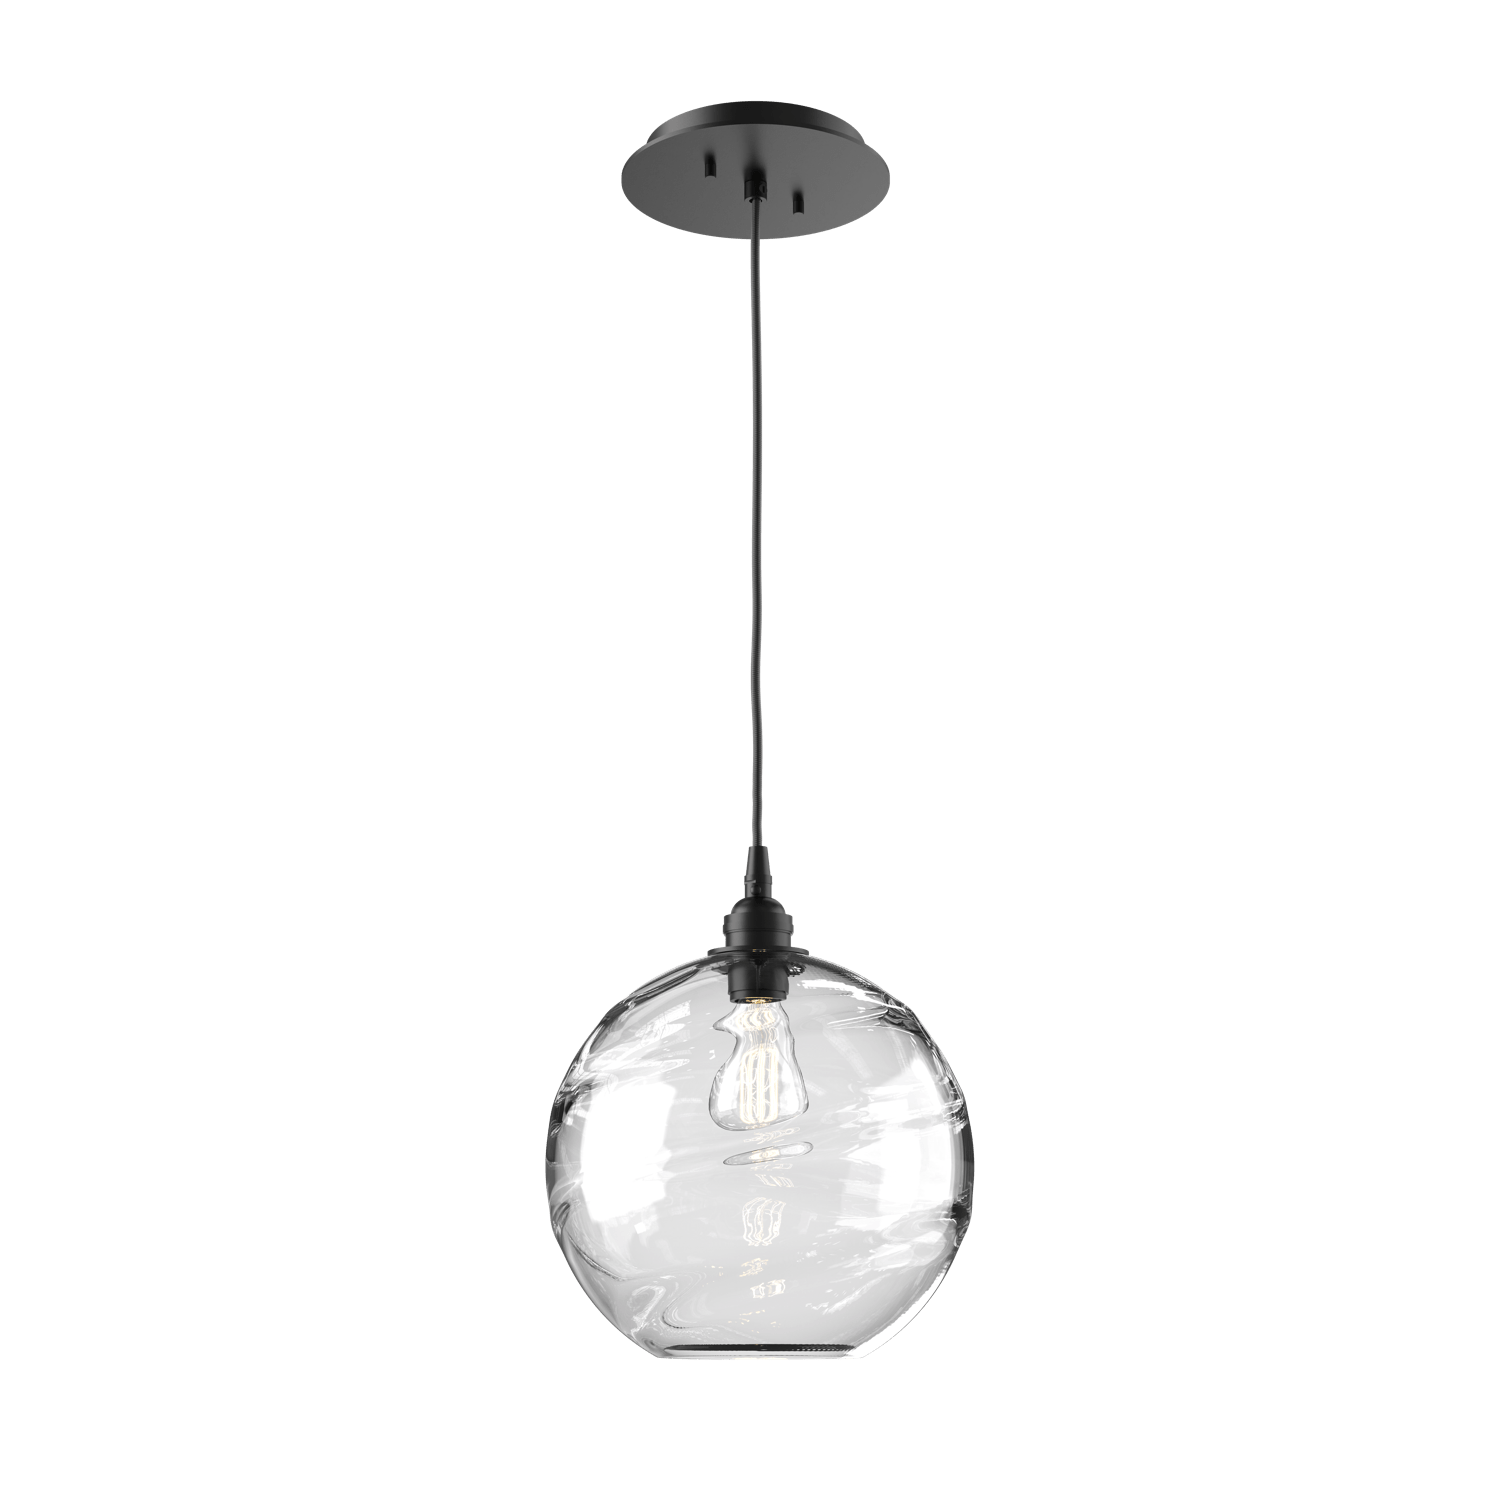 LAB0047-01-MB-OC-Hammerton-Studio-Optic-Blown-Glass-Terra-pendant-light-with-matte-black-finish-and-optic-clear-blown-glass-shades-and-incandescent-lamping